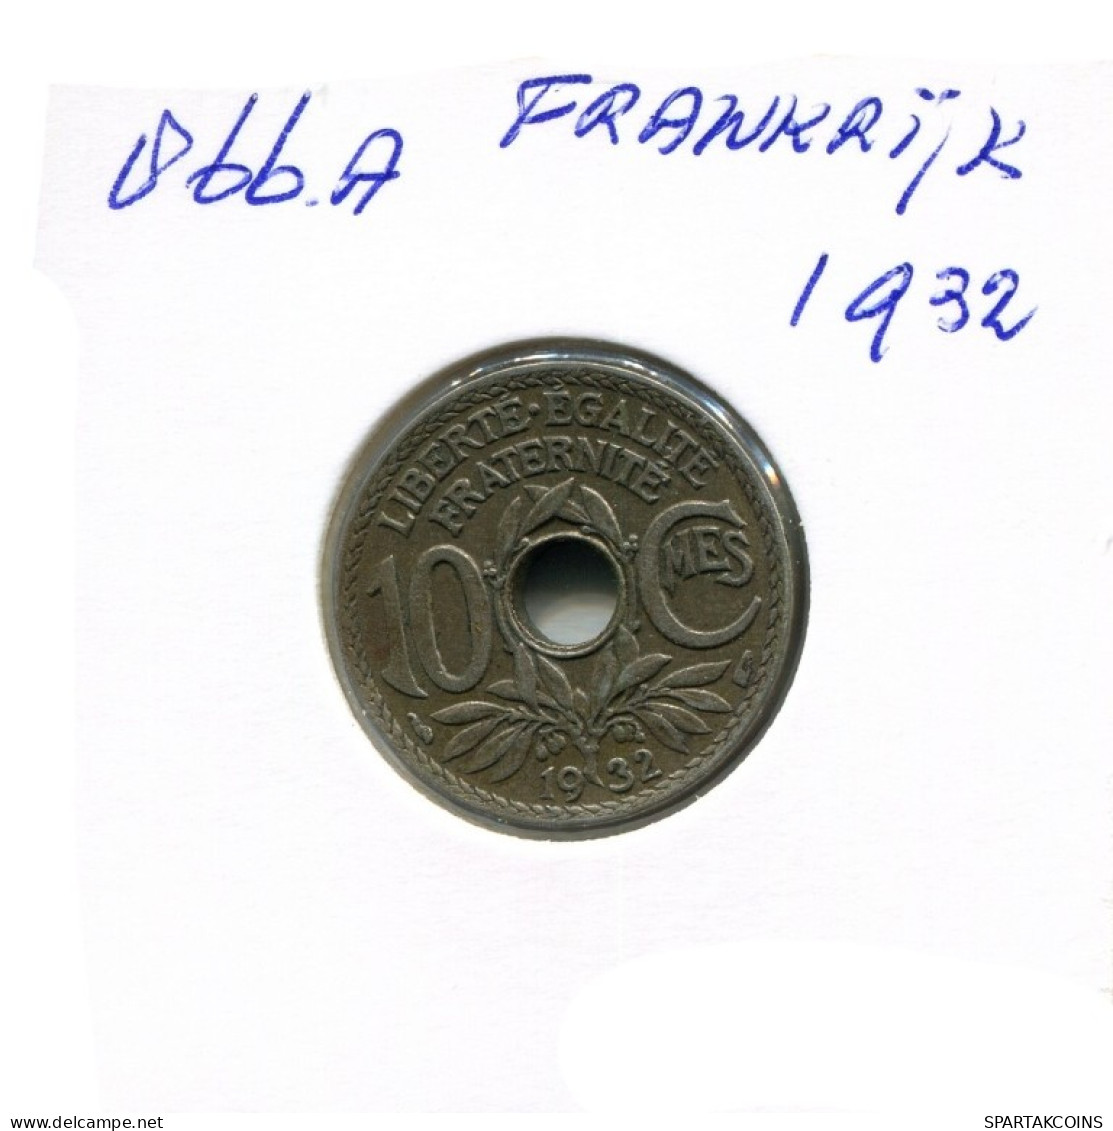 10 CENTIMES 1932 FRANCE Coin French Coin #AN106.U.A - 10 Centimes